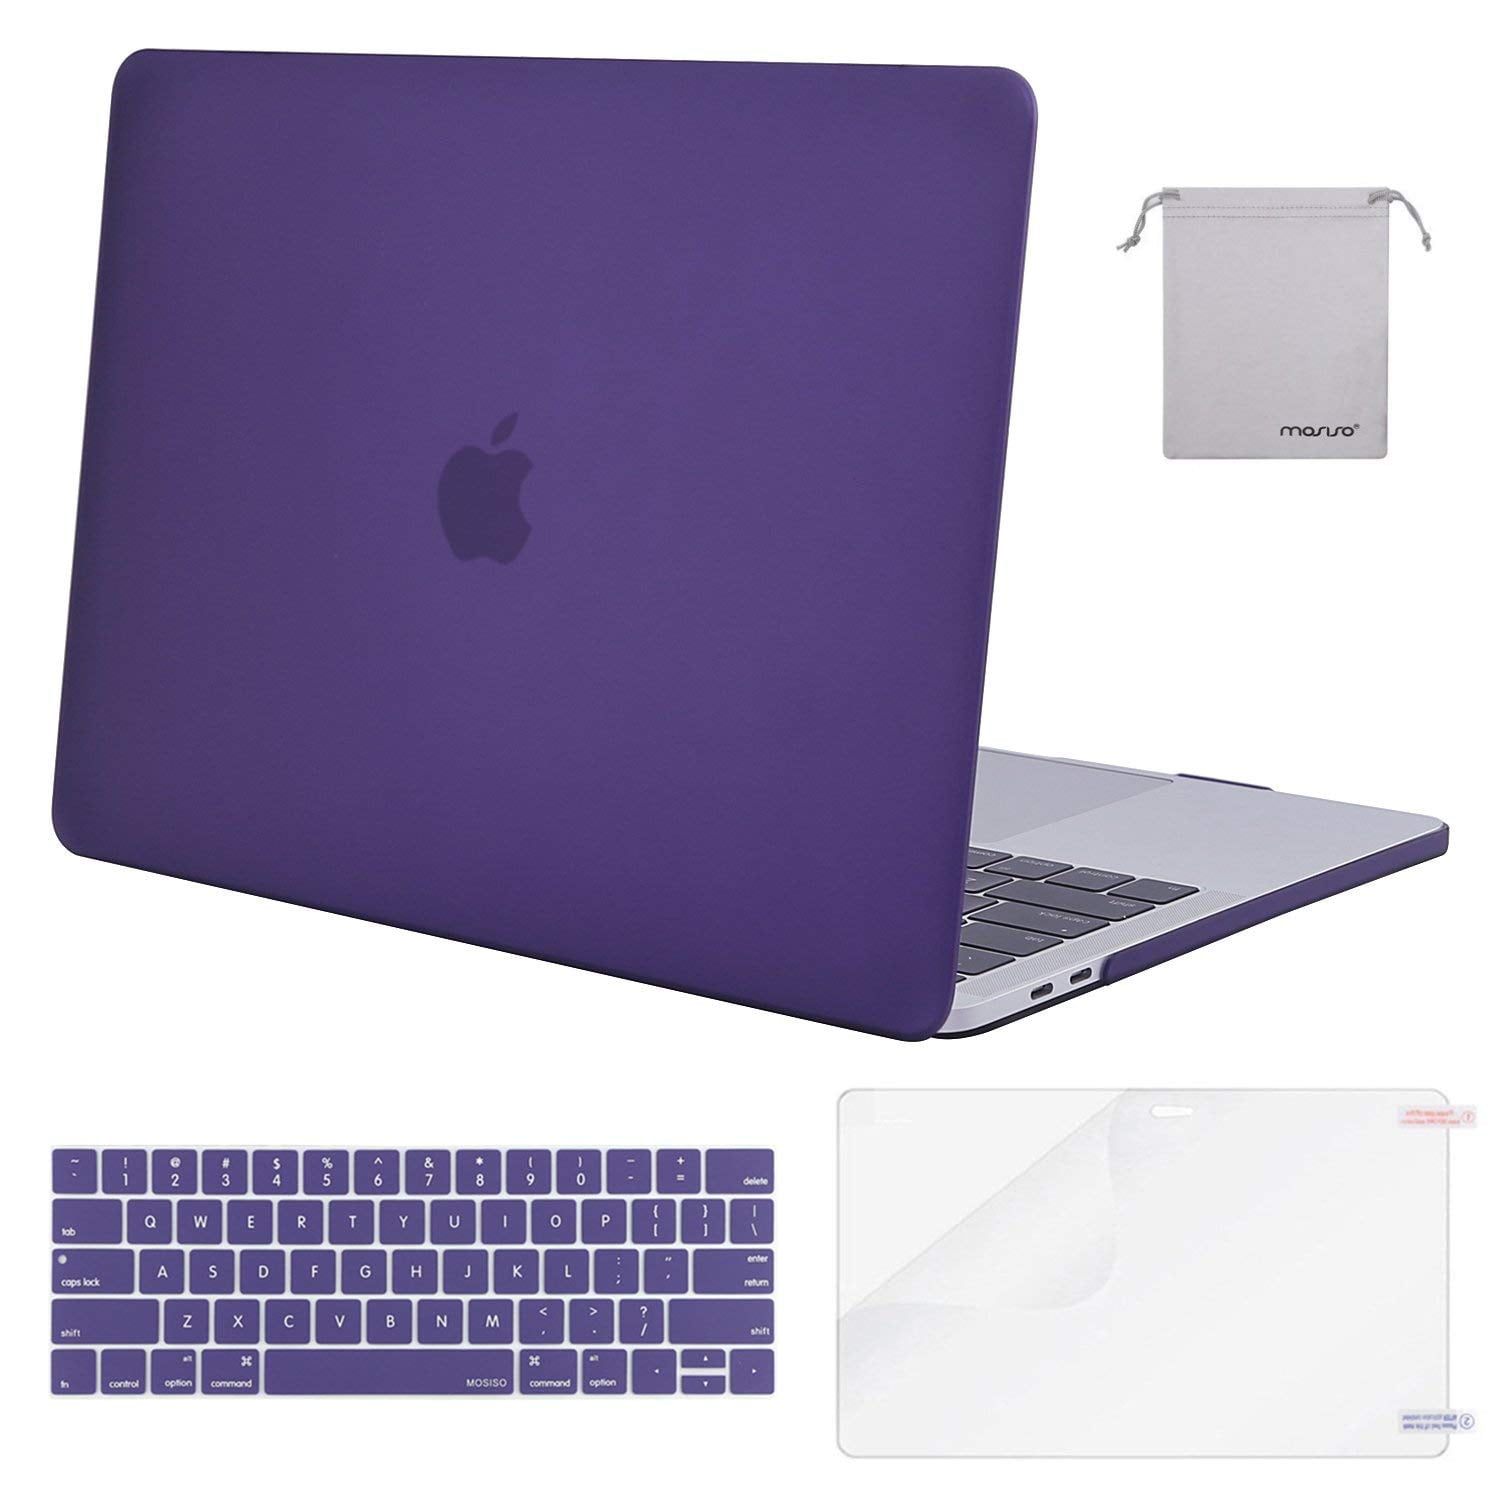 MacBook Pro 13 Cases White Spring Retro Lilac Flower Plastic Hard Shell Compatible Mac Air 11 Pro 13 15 Mac Book Pro Cases Protection for MacBook 2016-2019 Version